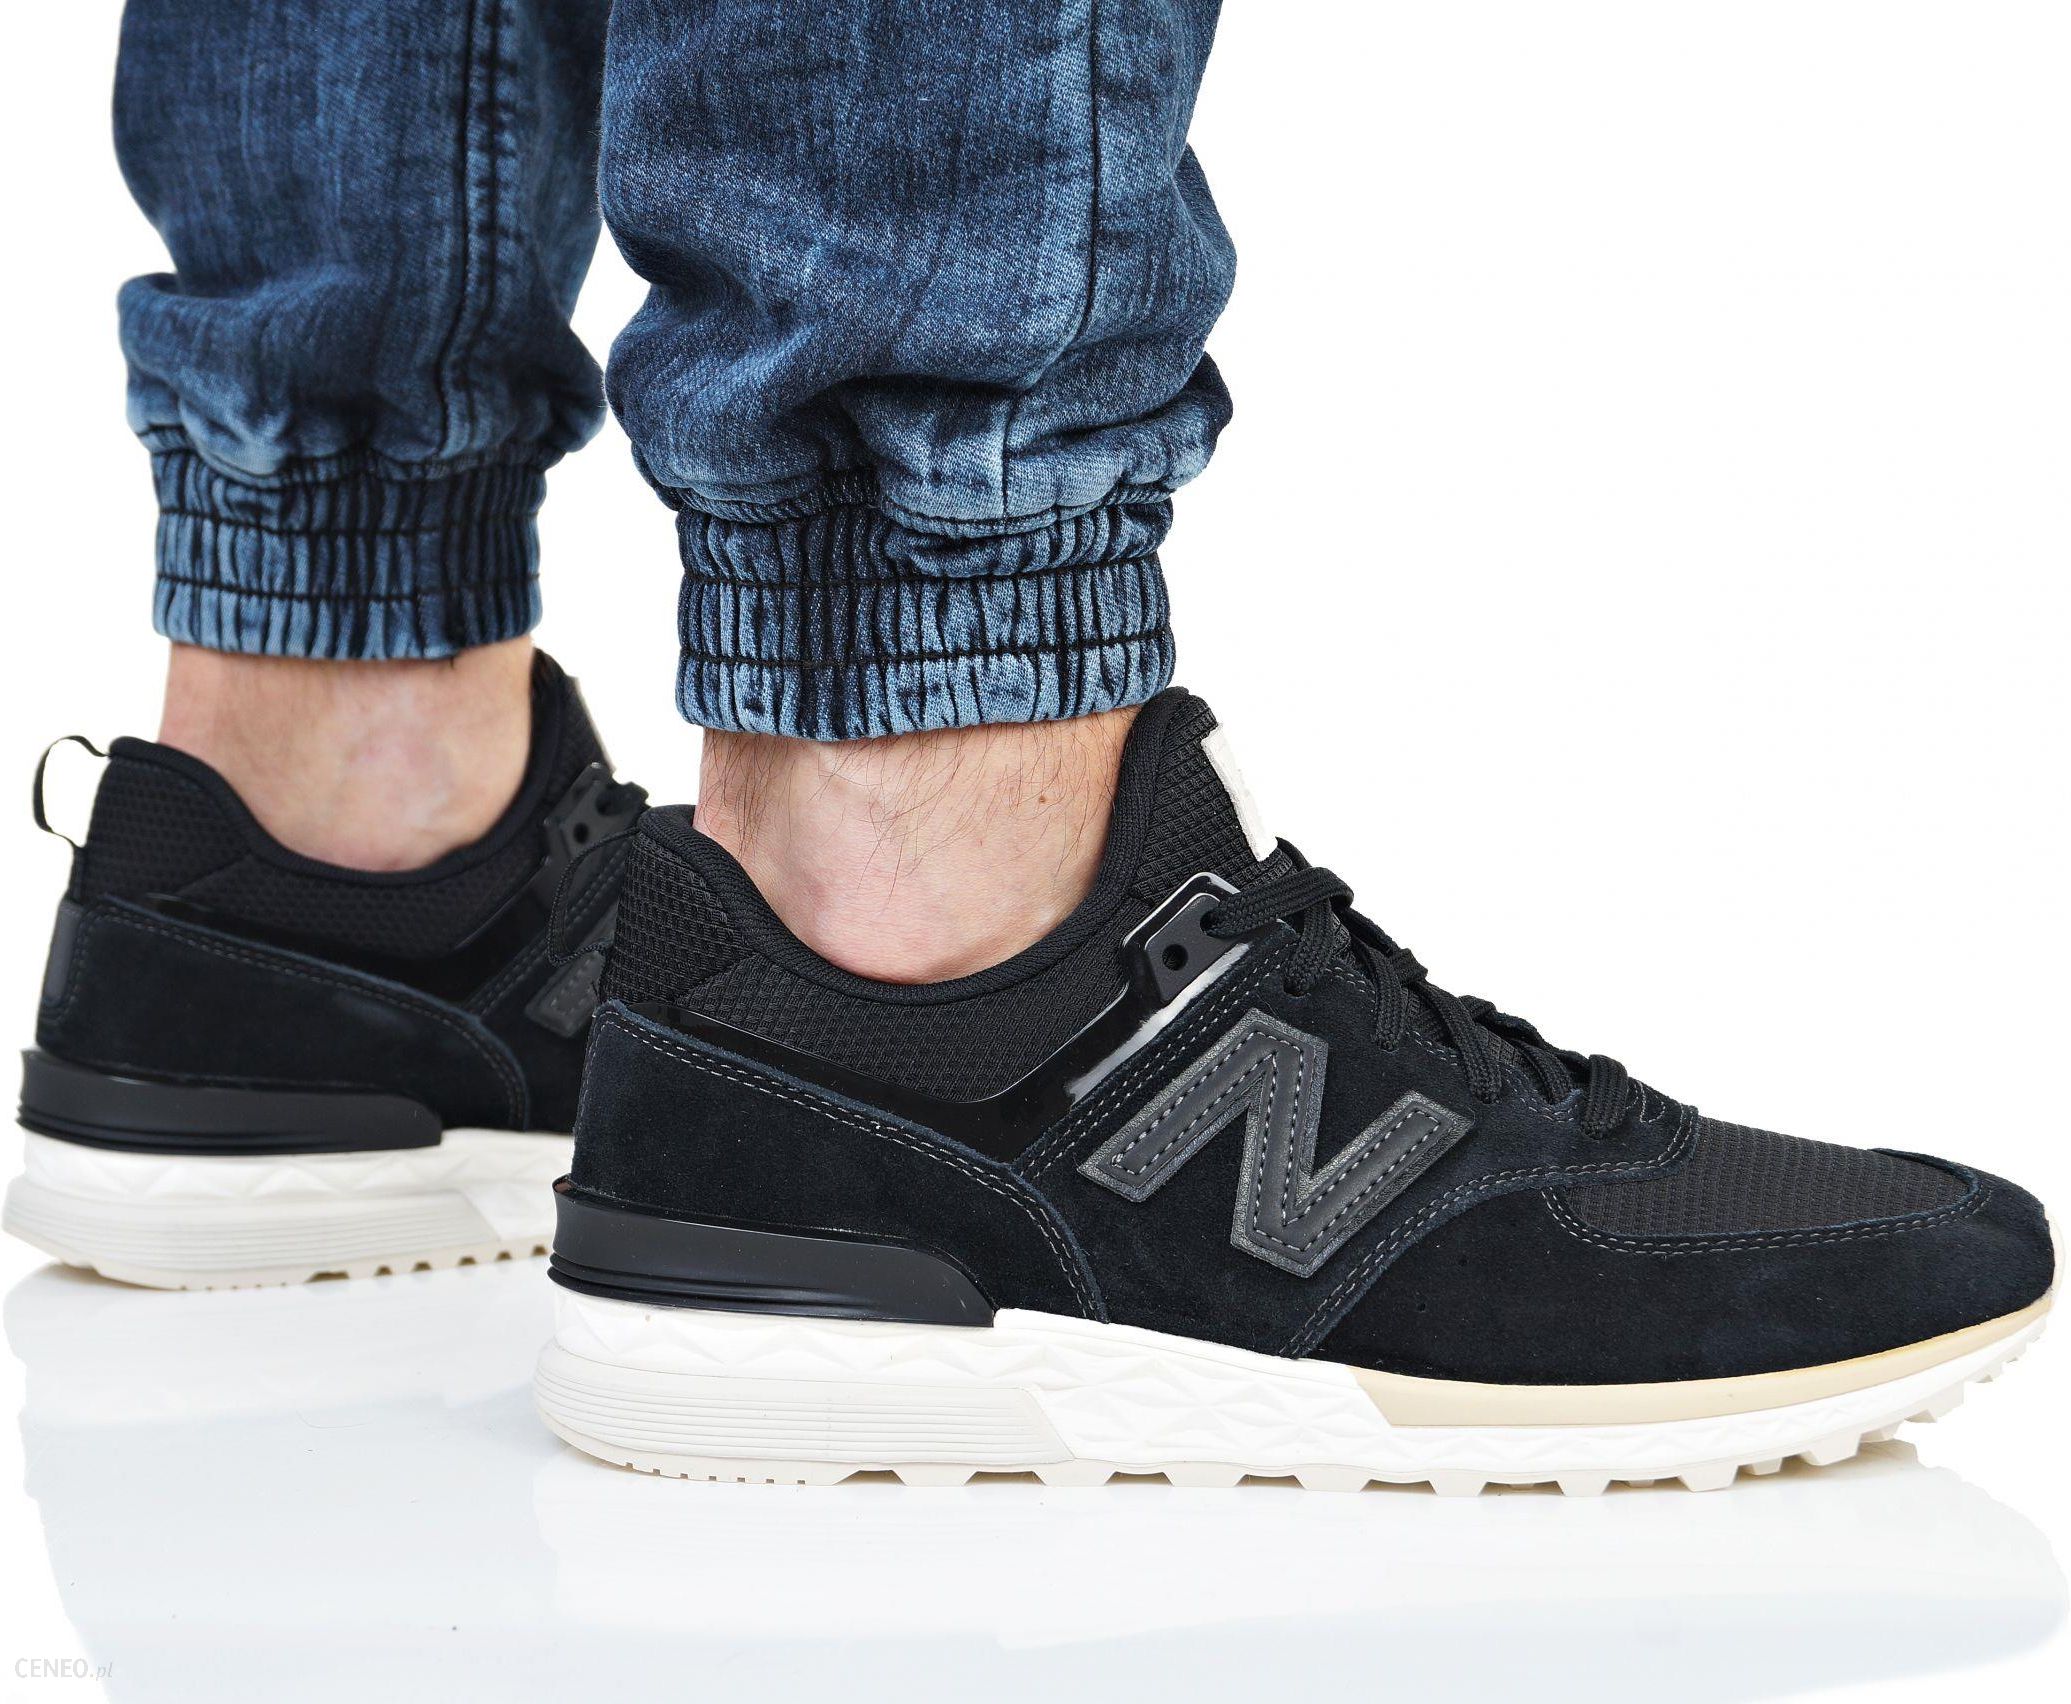 Purchase > new balance 574 ms, Up to 75% OFF